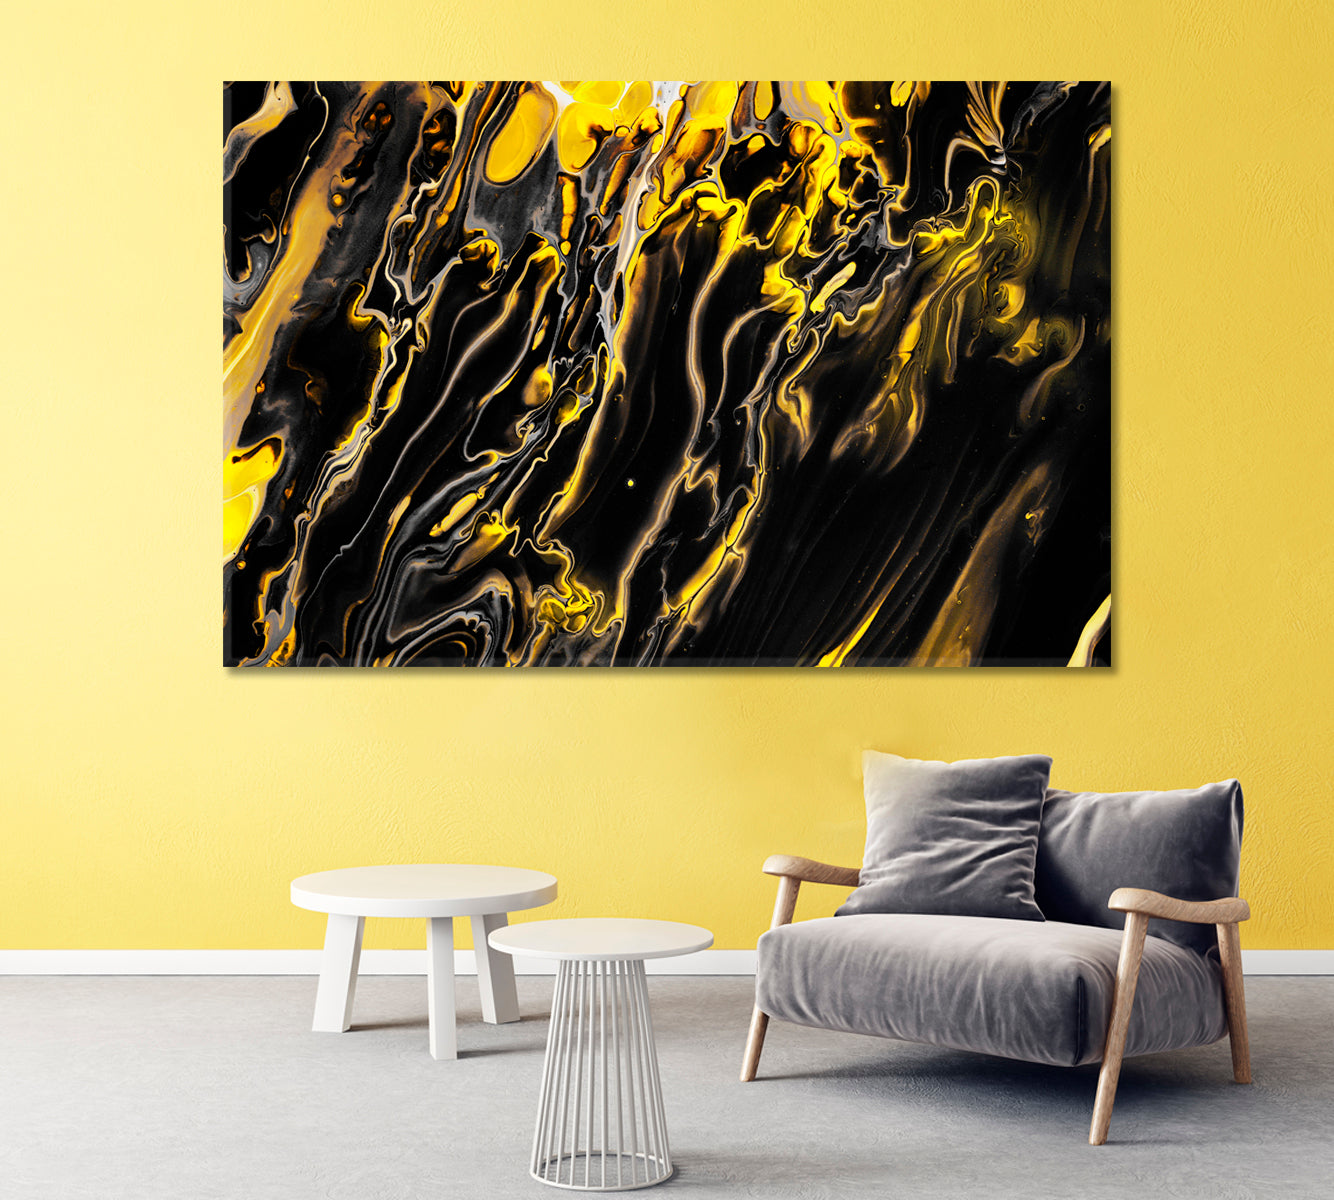 Black and Yellow Fluid Marble Pattern Canvas Print-Canvas Print-CetArt-1 Panel-24x16 inches-CetArt